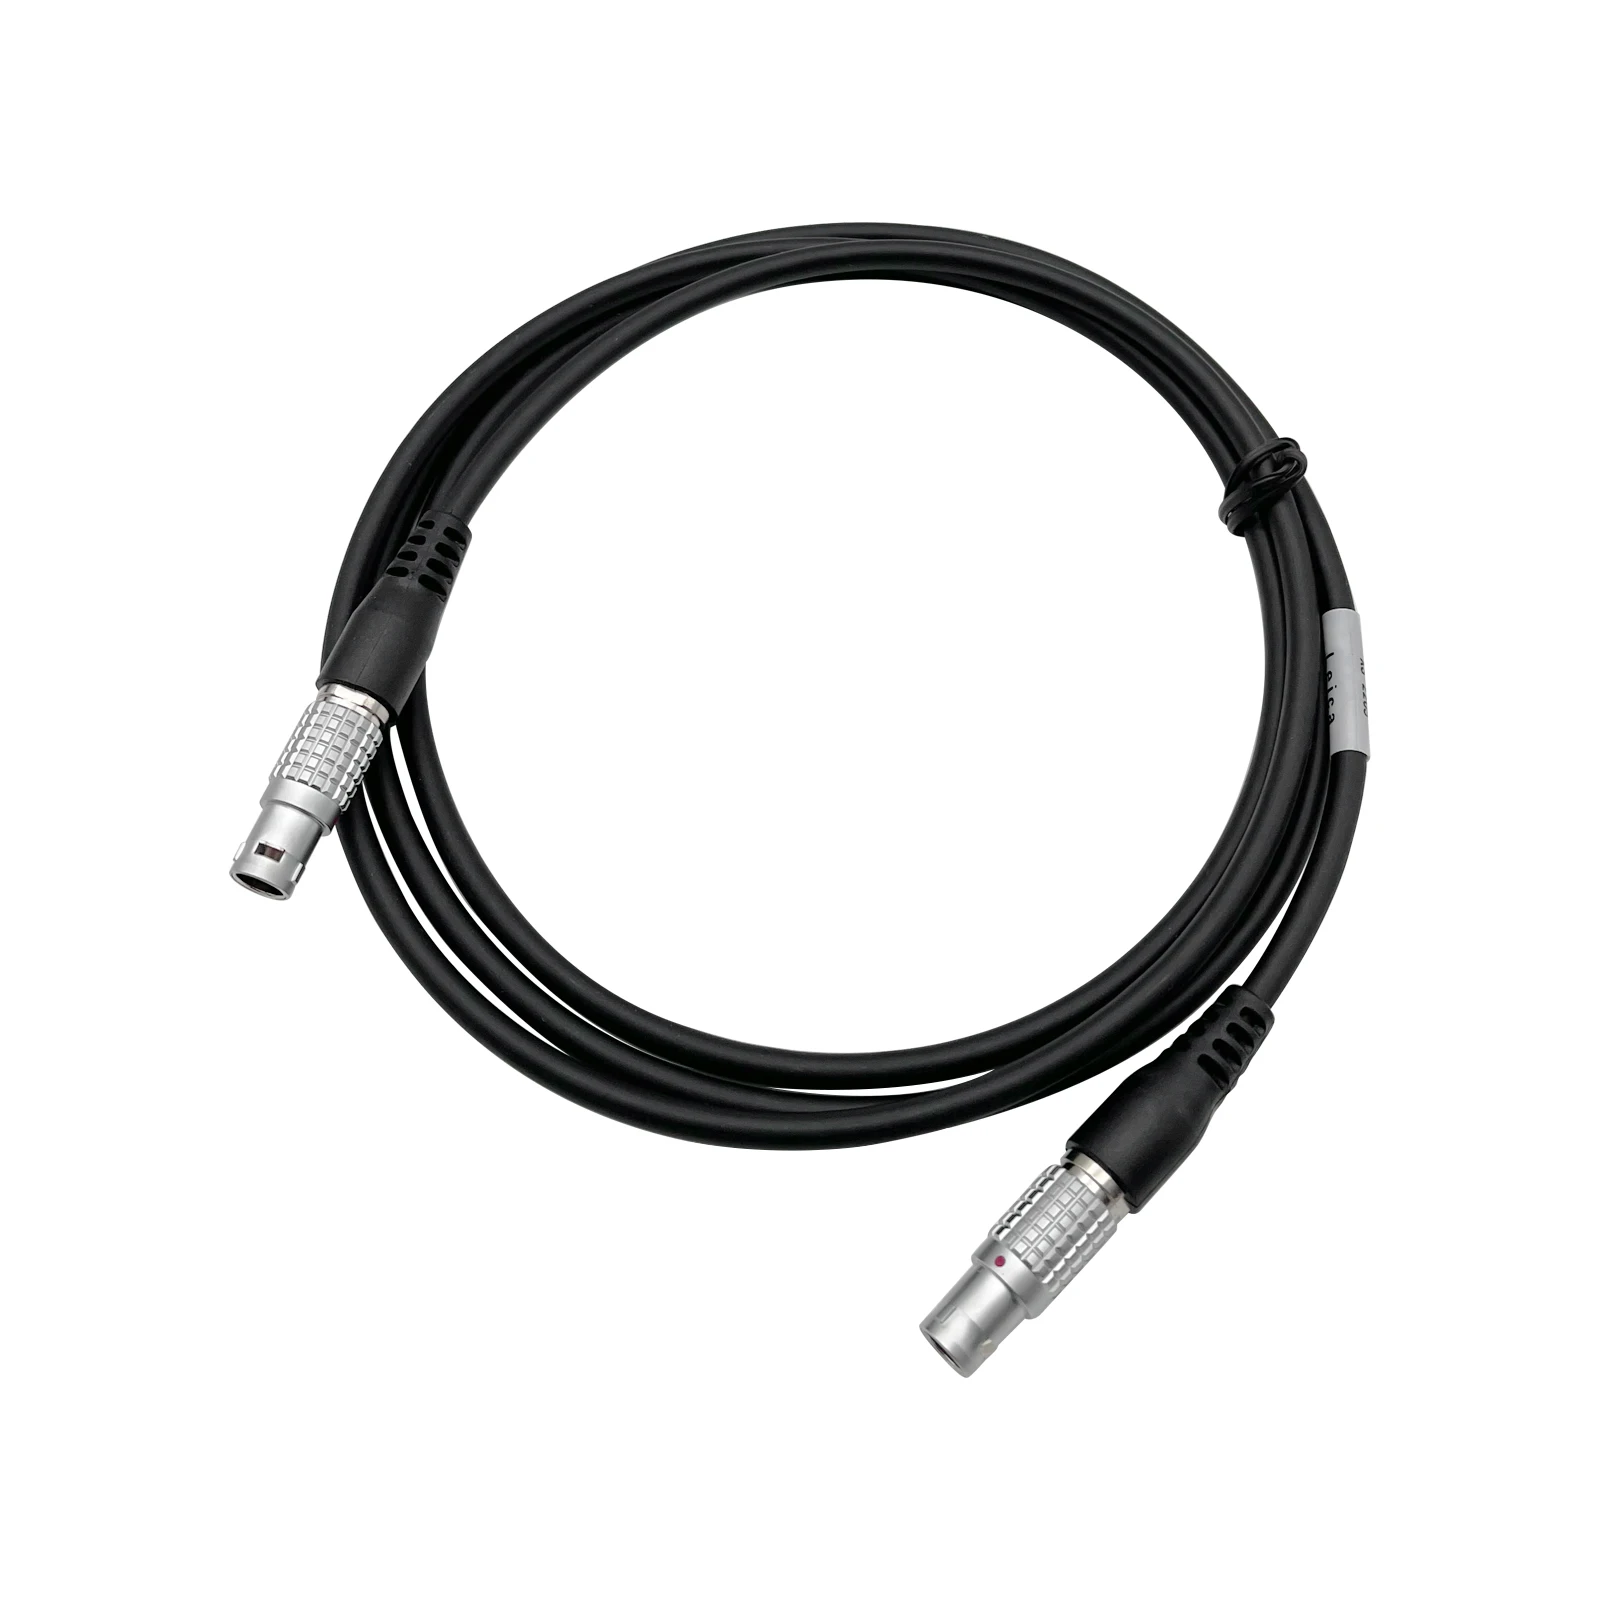 

High Quality GEV163 (733283) Cable 1.8M For Leica Surveying GPS Wire RX1210 To GRX1200 1B 8PIN+LEMO 1B 8PIN